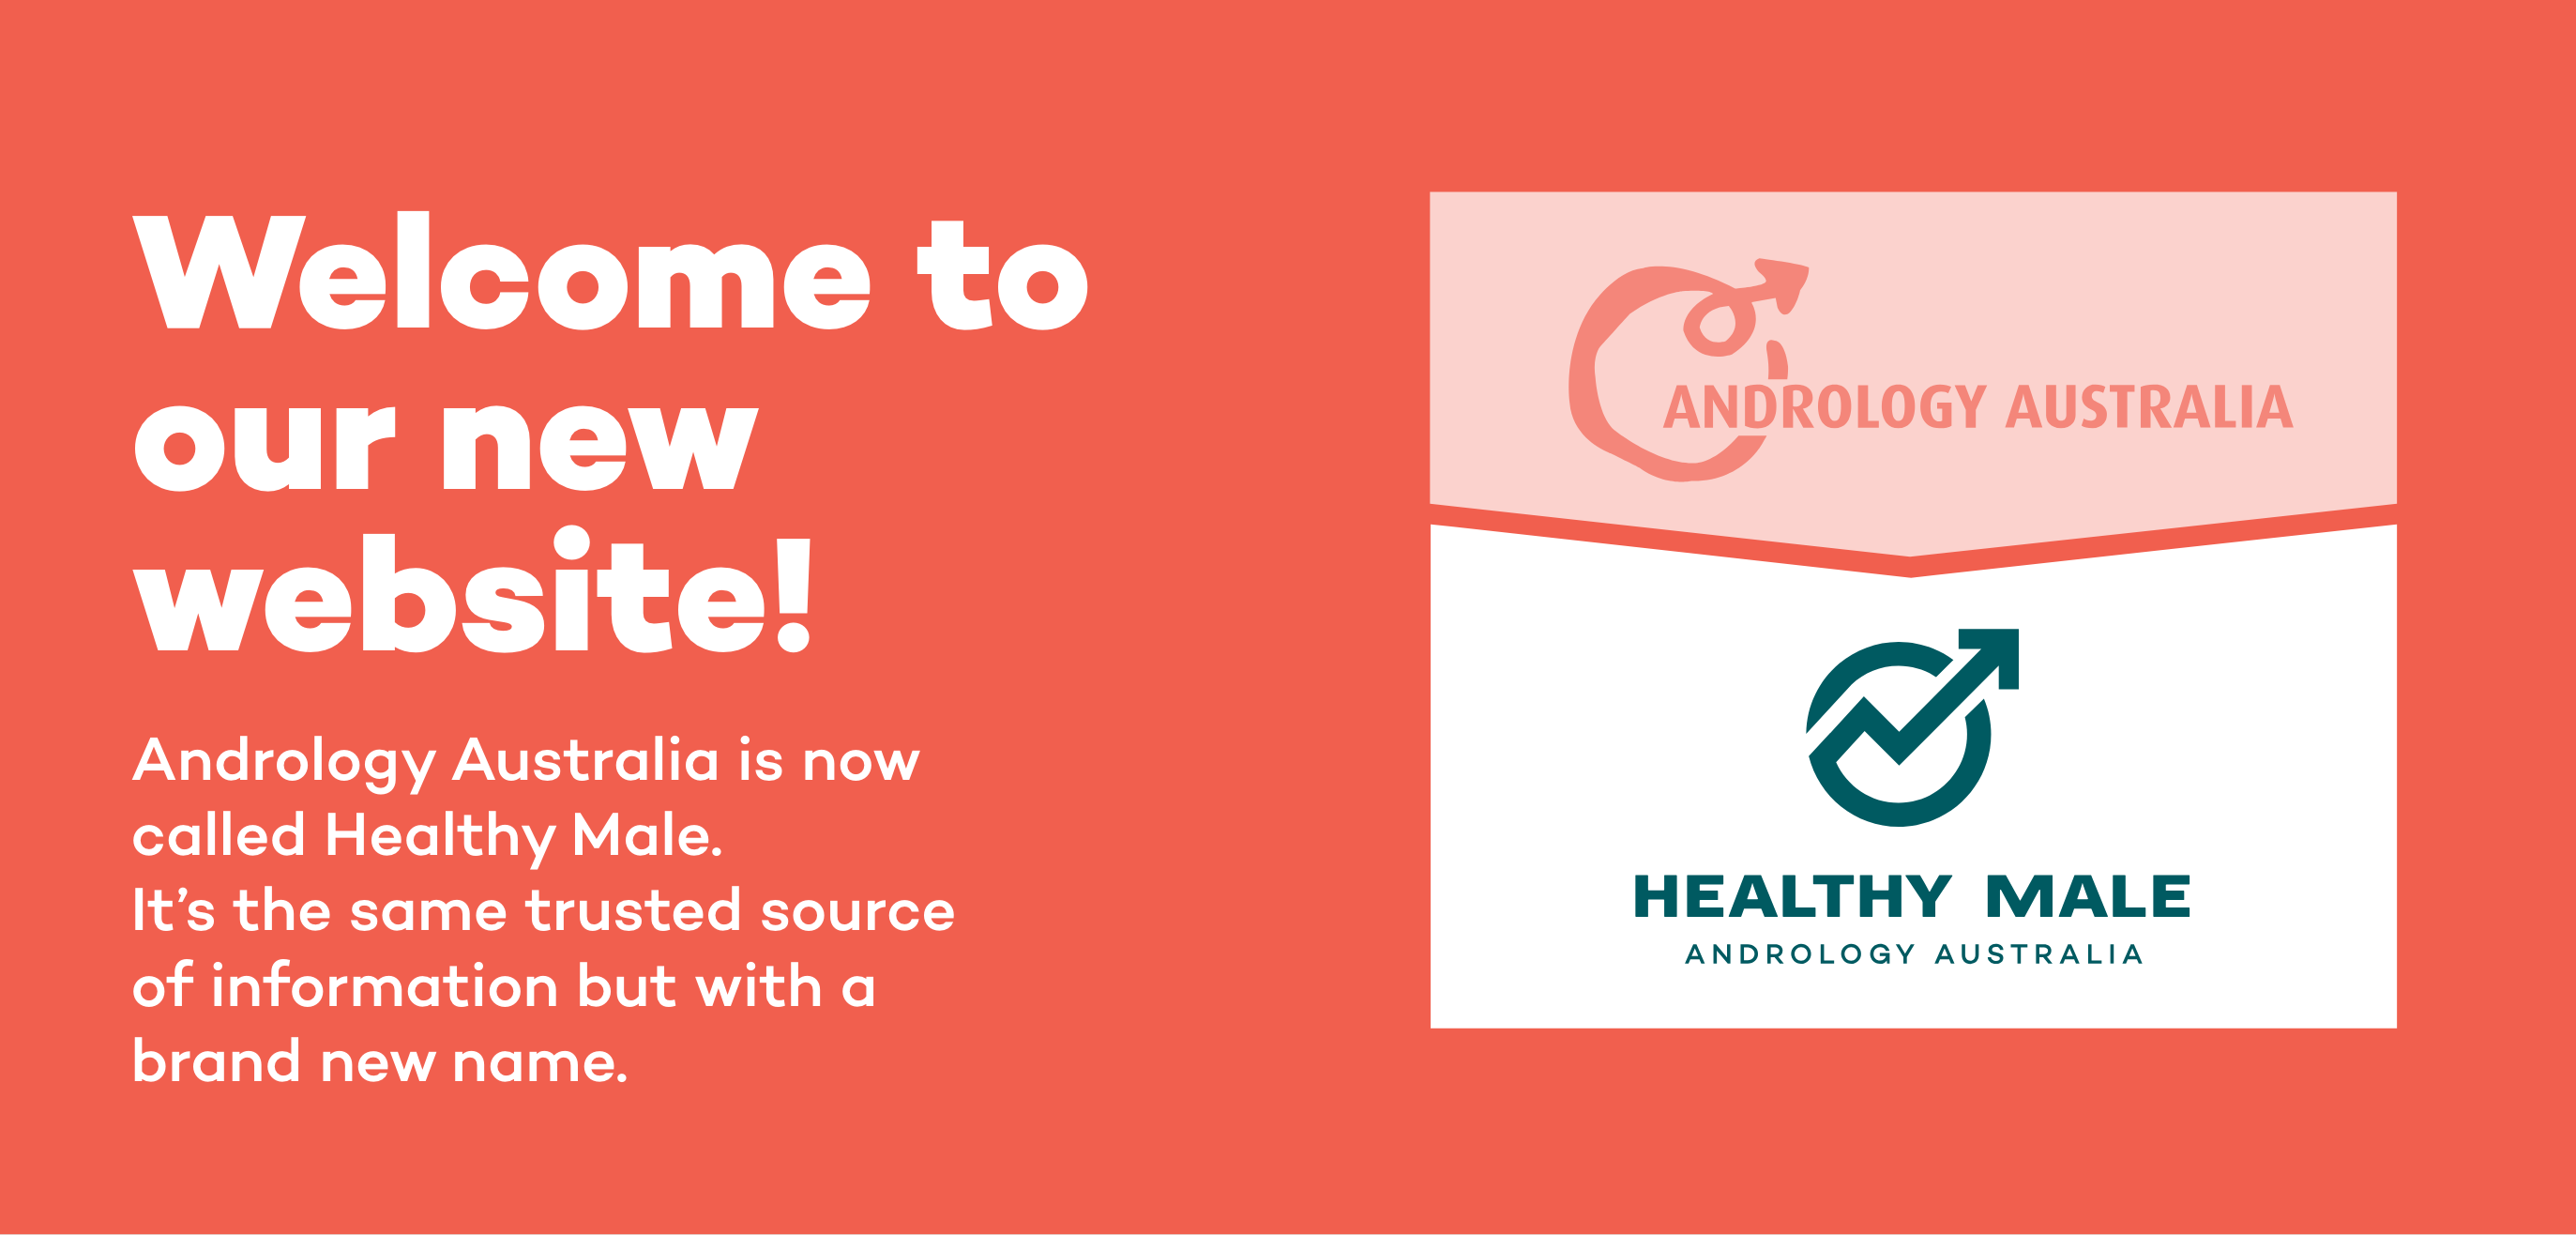 Welcome to our new website - Andrology Australia is now called Healthy Male. It's the same trusted source of information but with a brand new name